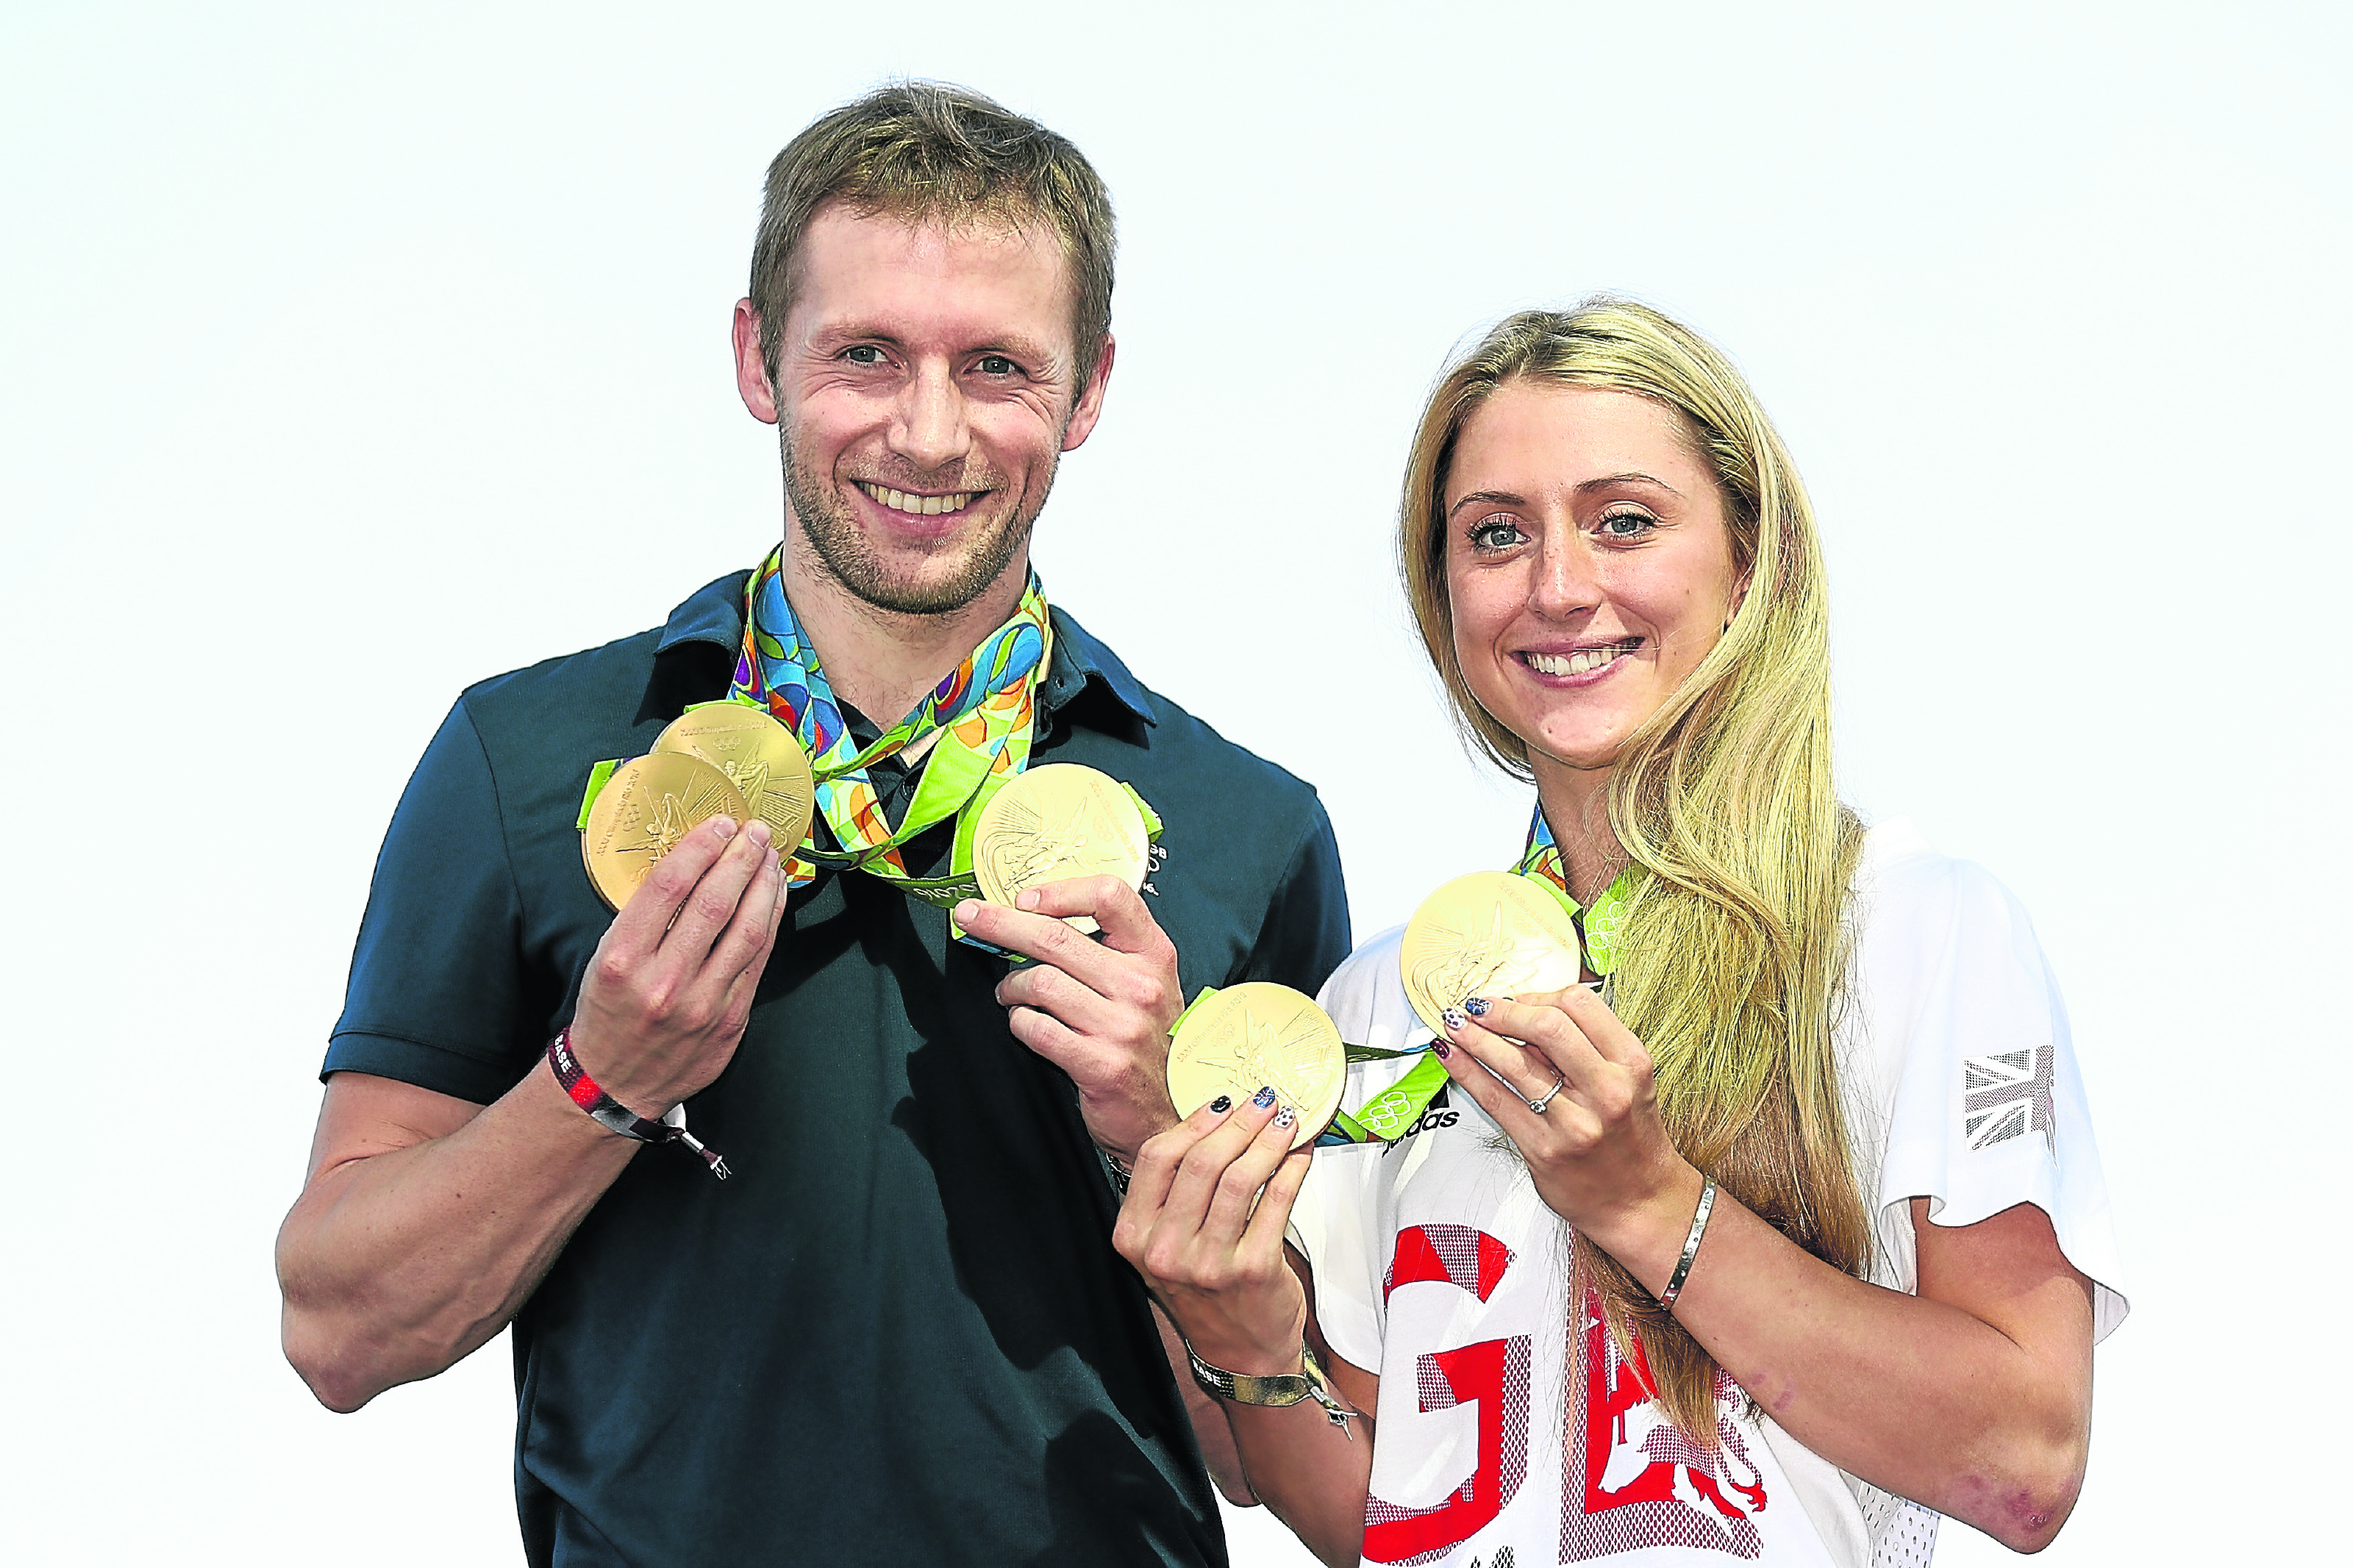 Team GB cyclists Laura Trott and Jason Kenny pose with their gold medals (Photo by Bryn Lennon/Getty Images)